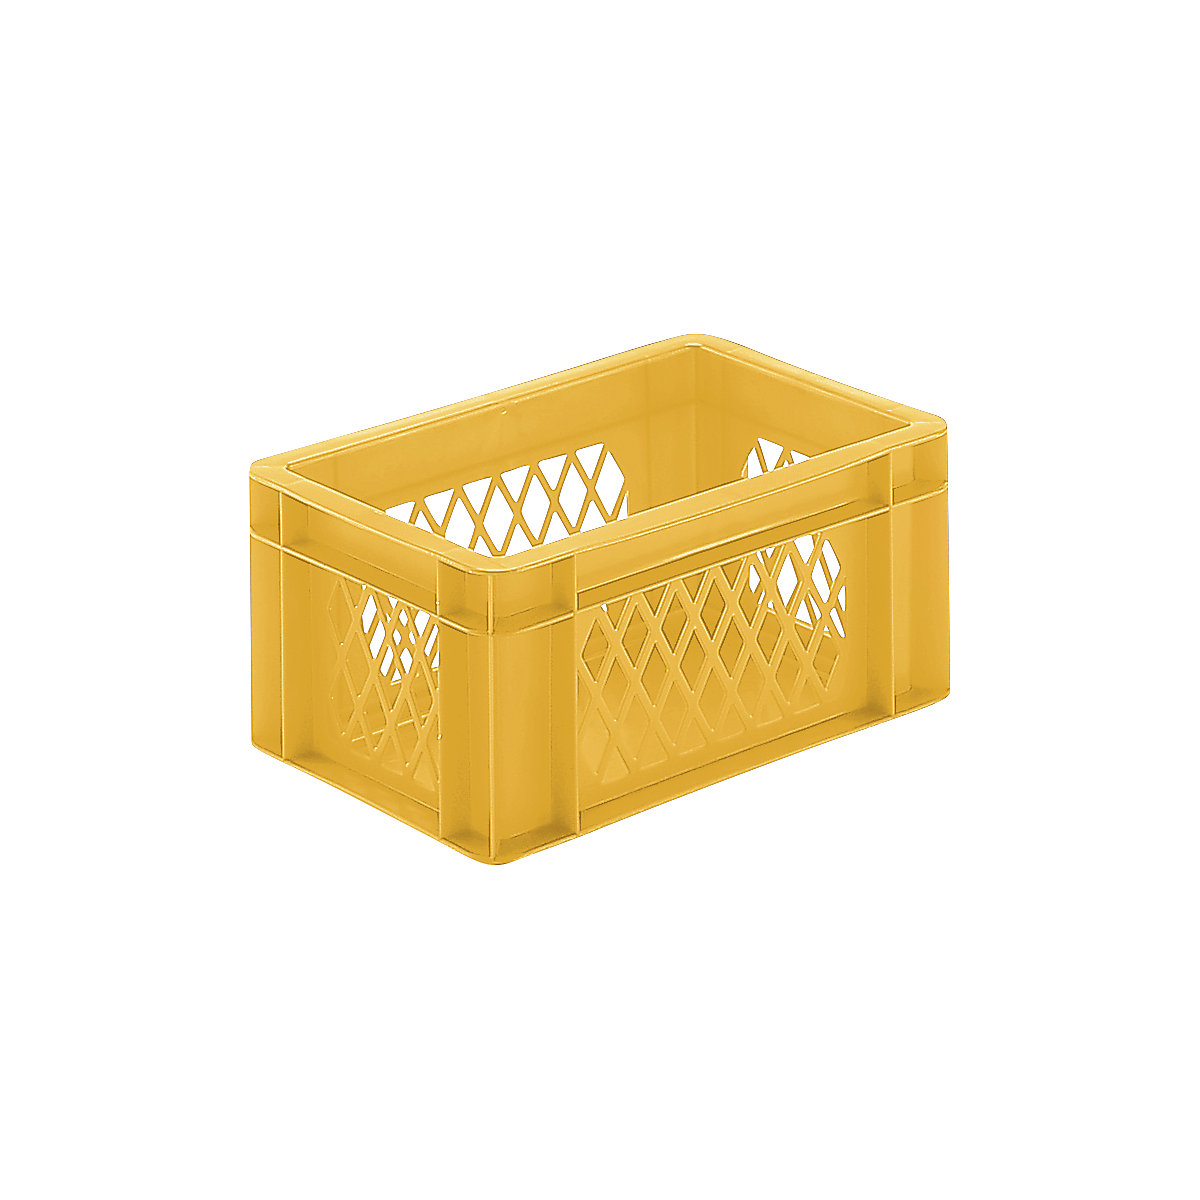 Euro stacking container, perforated walls, closed base, LxWxH 300 x 200 x 145 mm, yellow, pack of 5-8